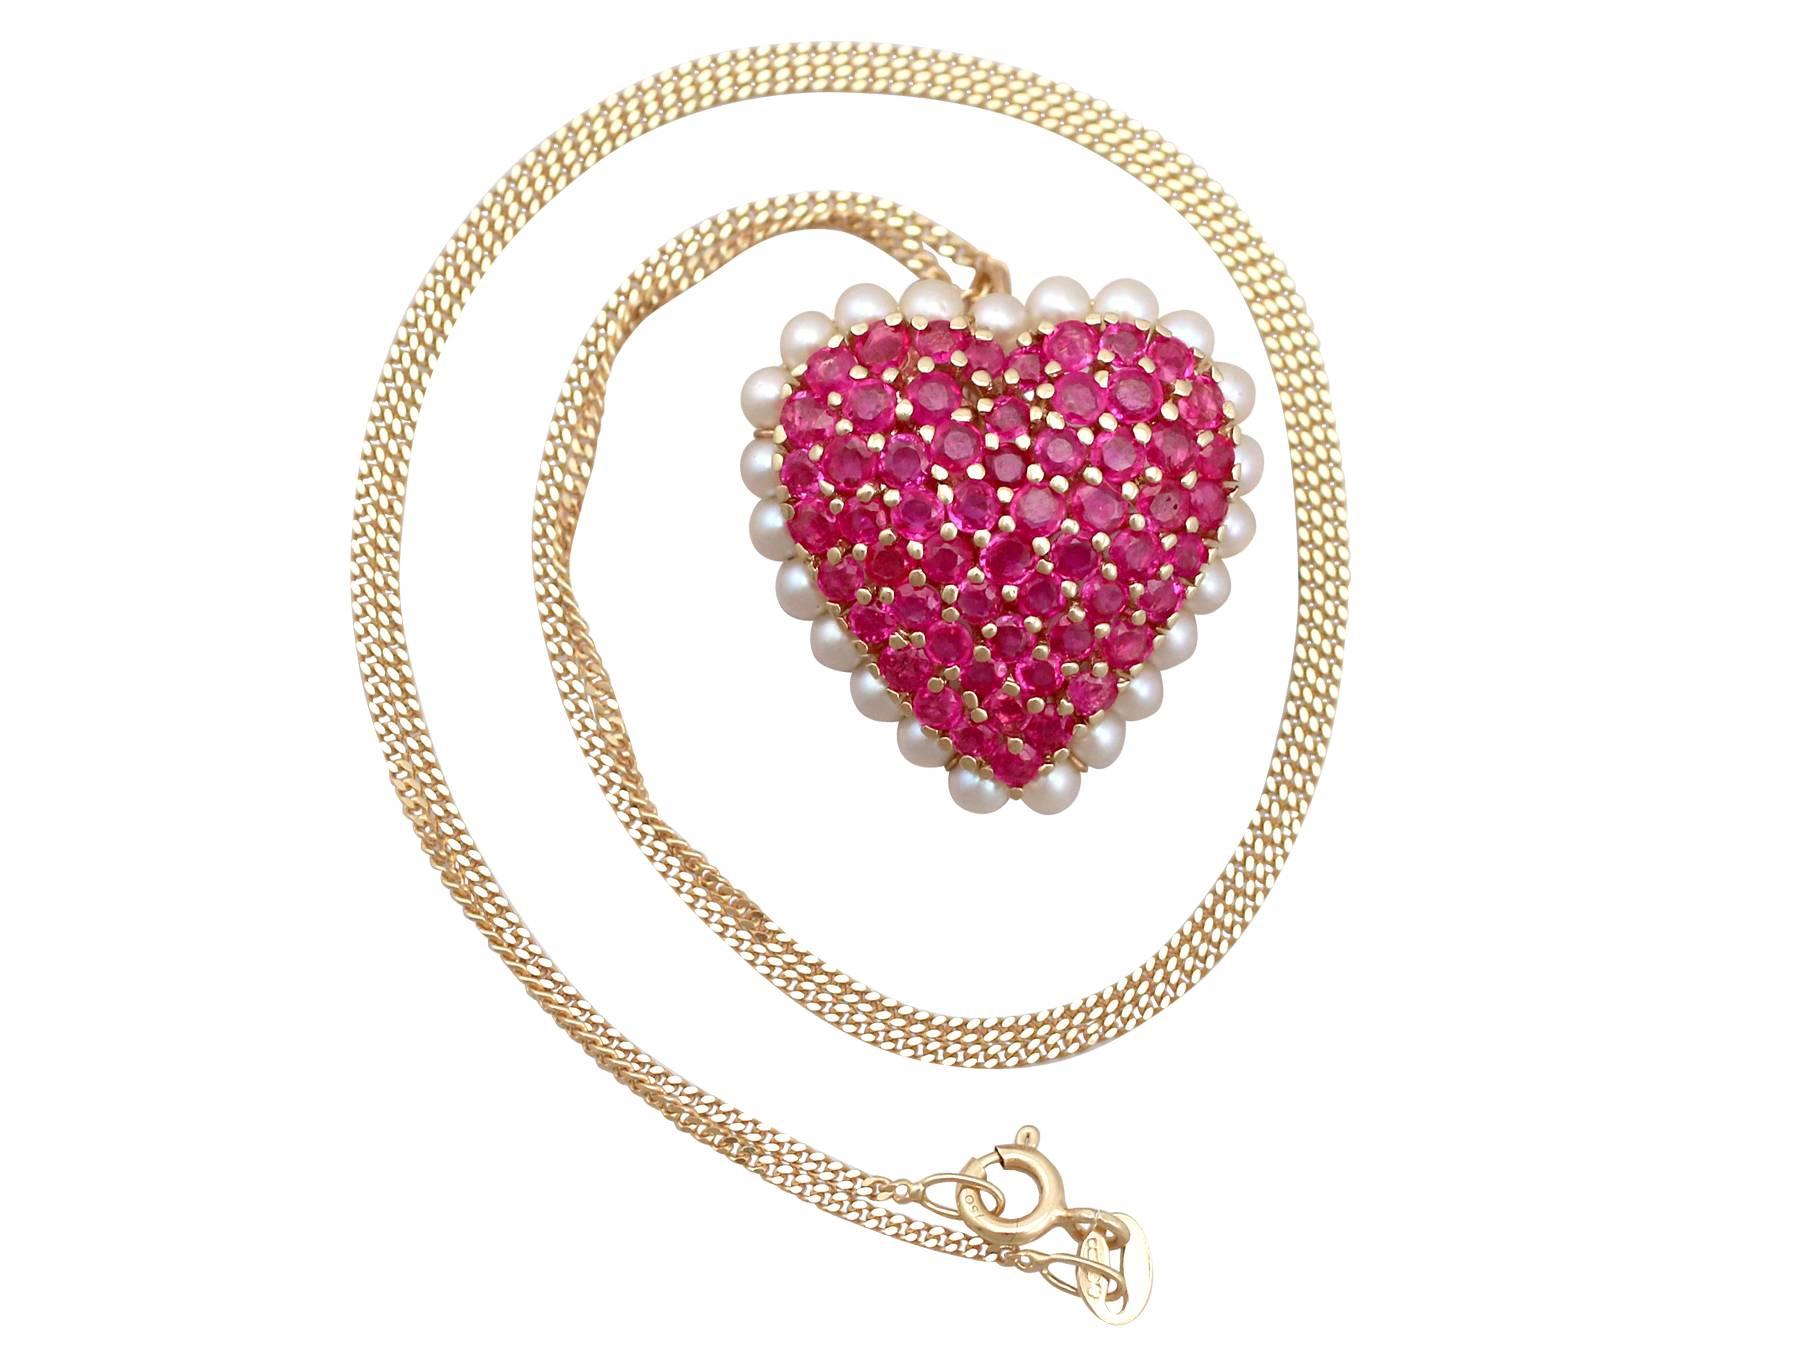 An impressive contemporary 3.36Ct ruby and seed pearl, 14k yellow gold heart brooch and 18k yellow gold chain; part of our diverse gemstone jewelry collections.

This fine and impressive contemporary ruby heart pendant with pearls has been crafted